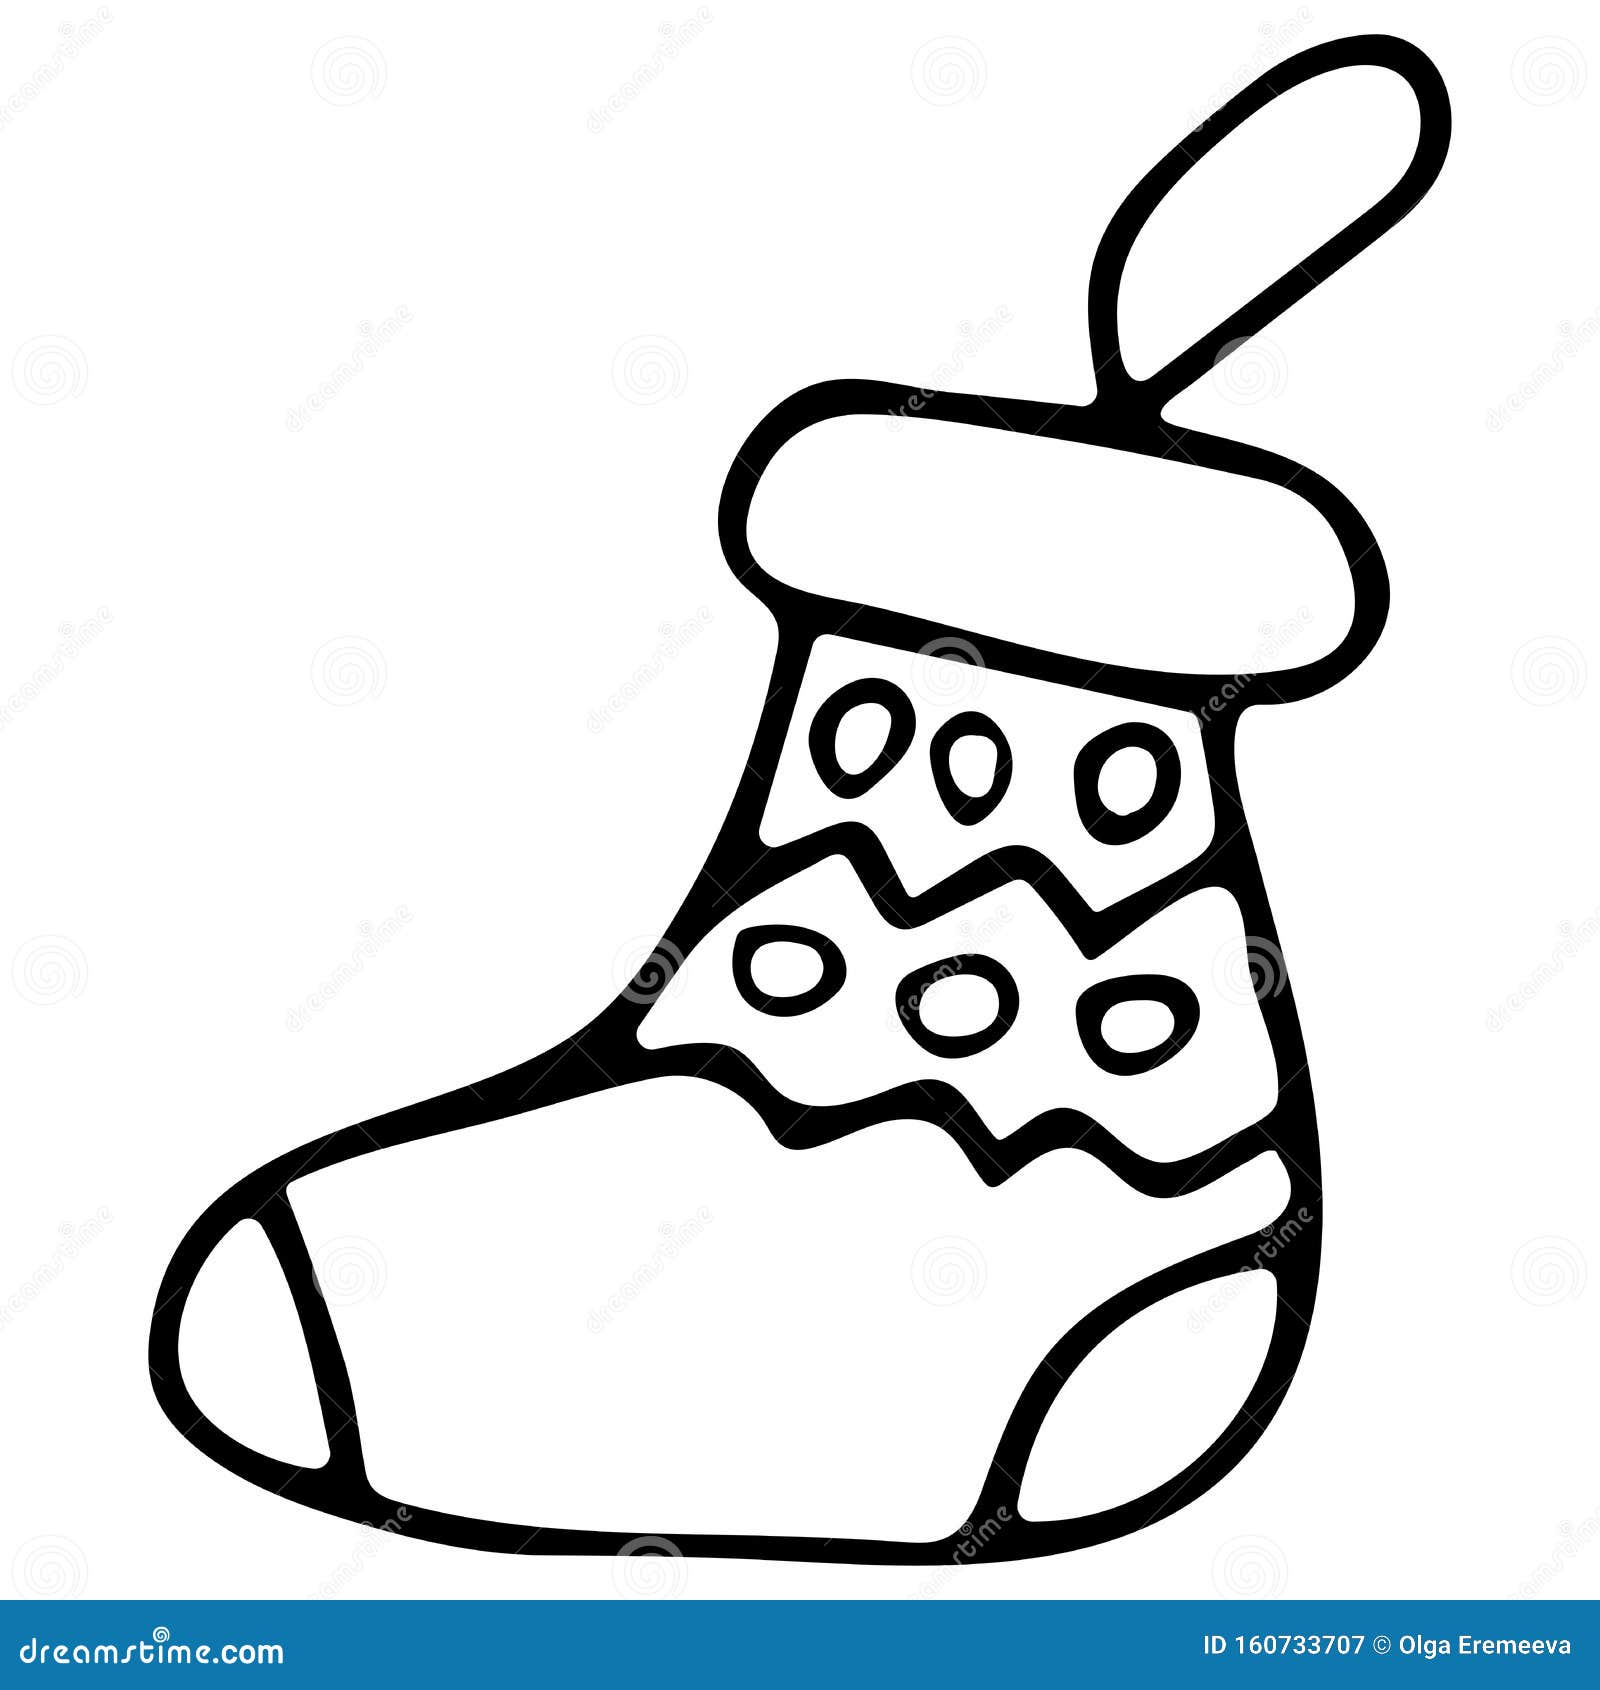 Christmas Socks for Gifts Black and White Doodle Style 2 Stock ...